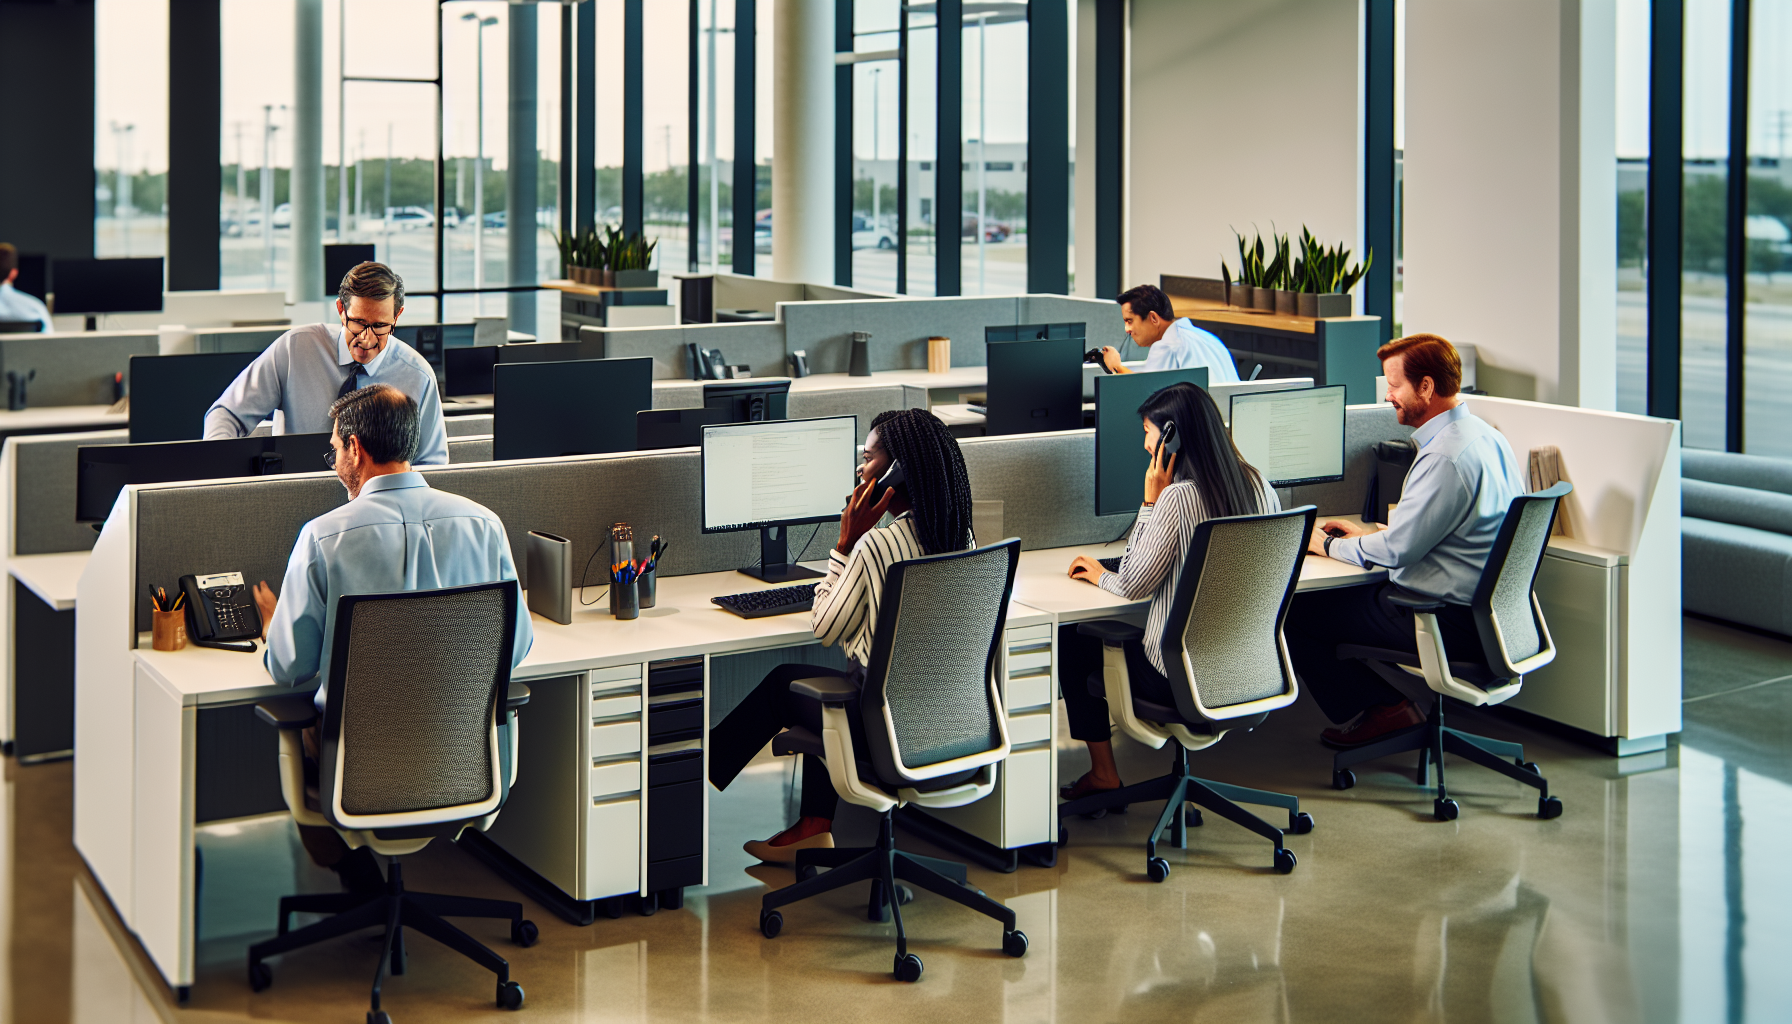 Diverse group of employees in a modern office setting